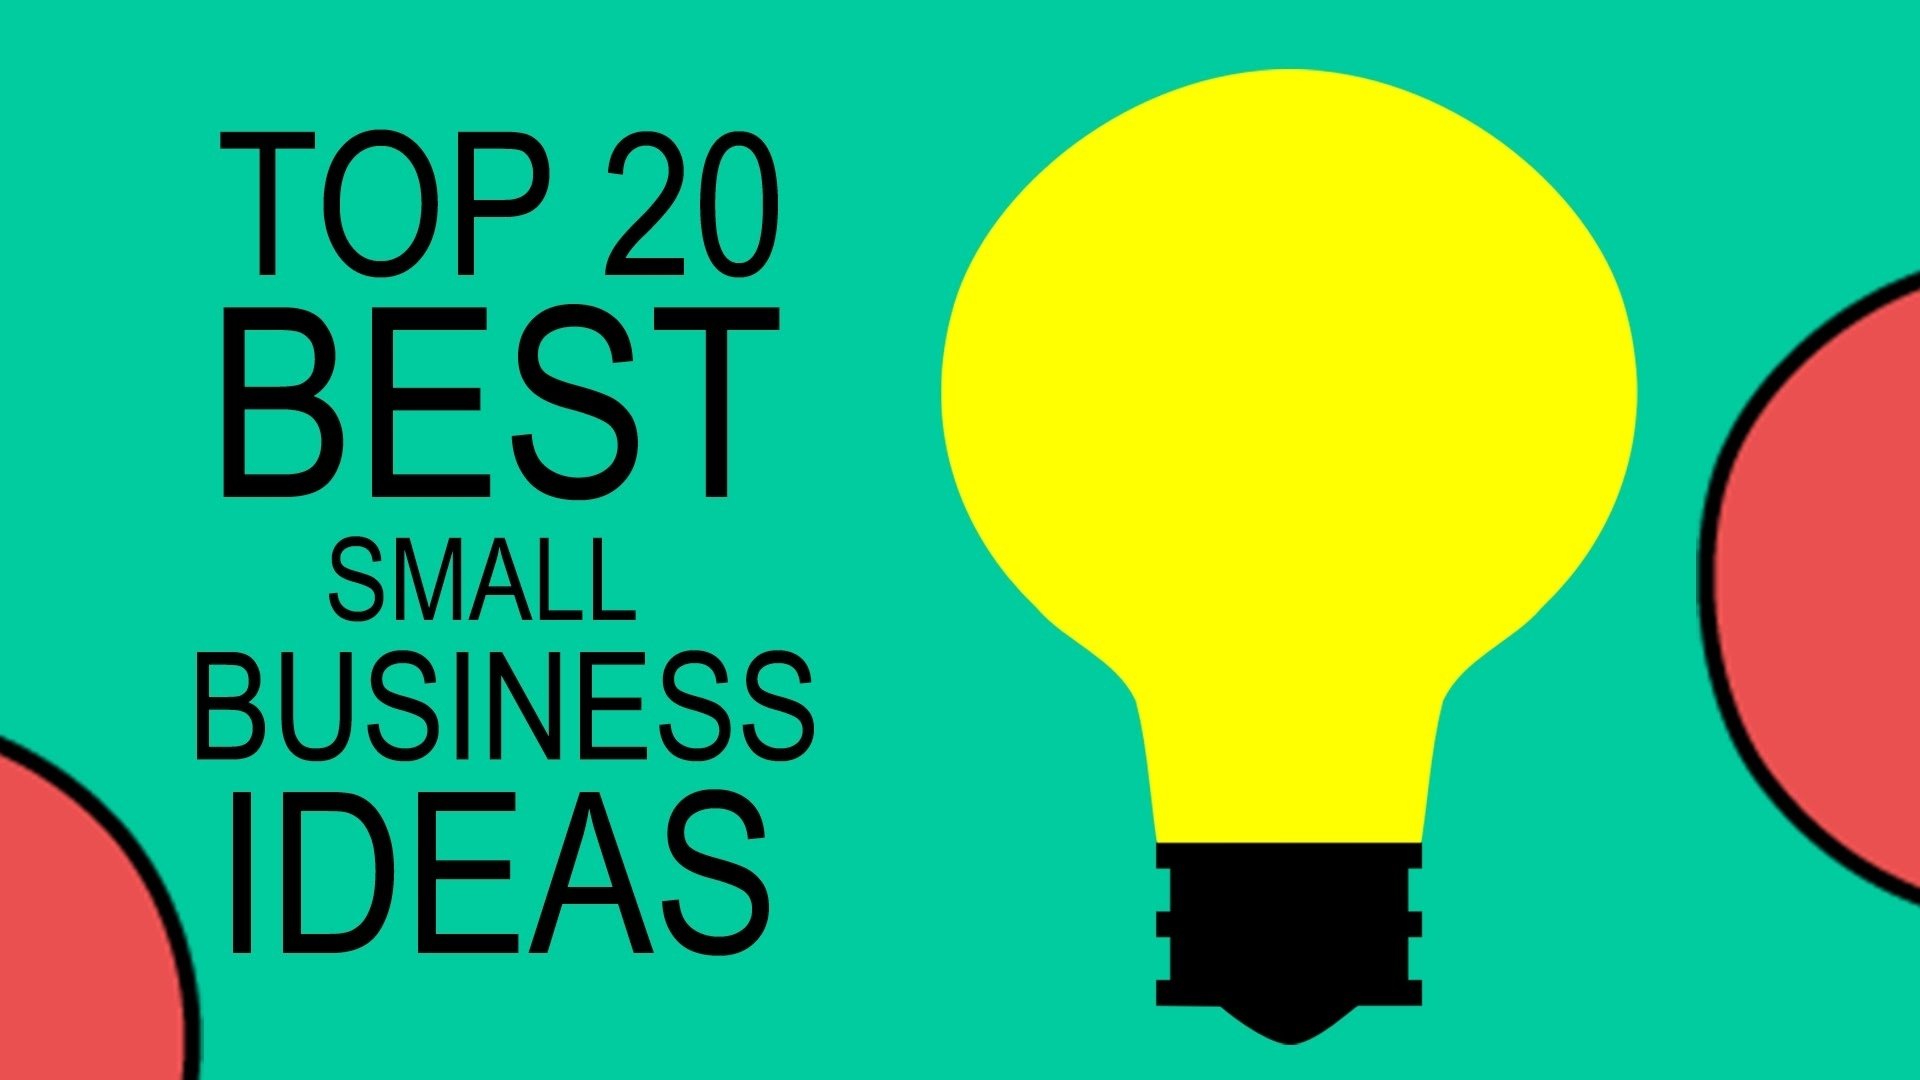 10 Famous Best Ideas For Small Business top 20 best small business ideas for beginners in 2017 youtube 3 2023